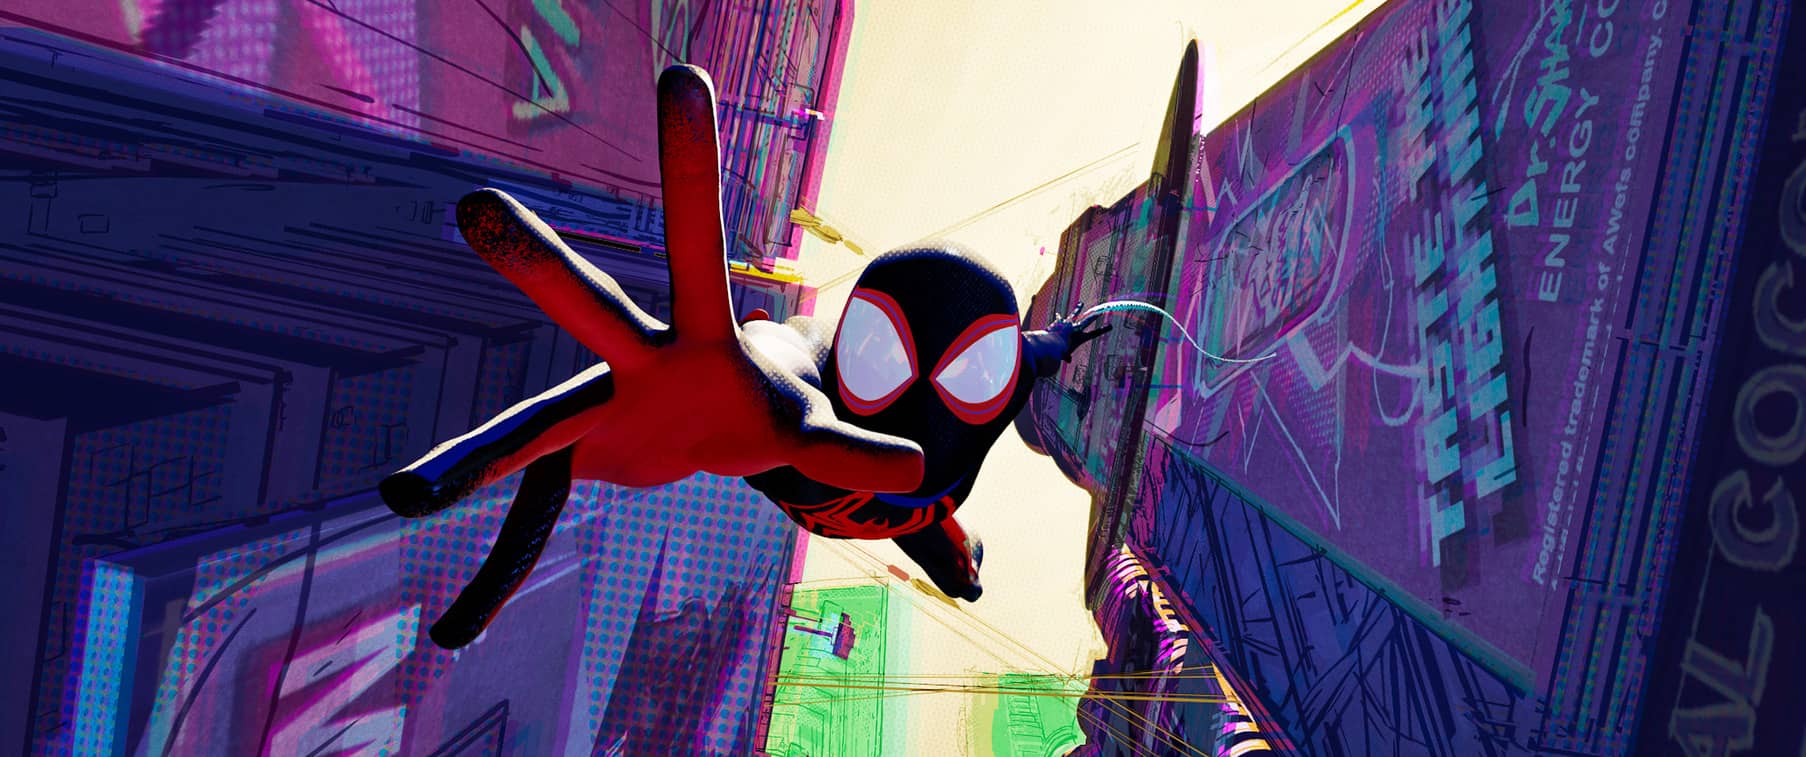 Spider-Man flying between buildings in this image from Columbia Pictures.